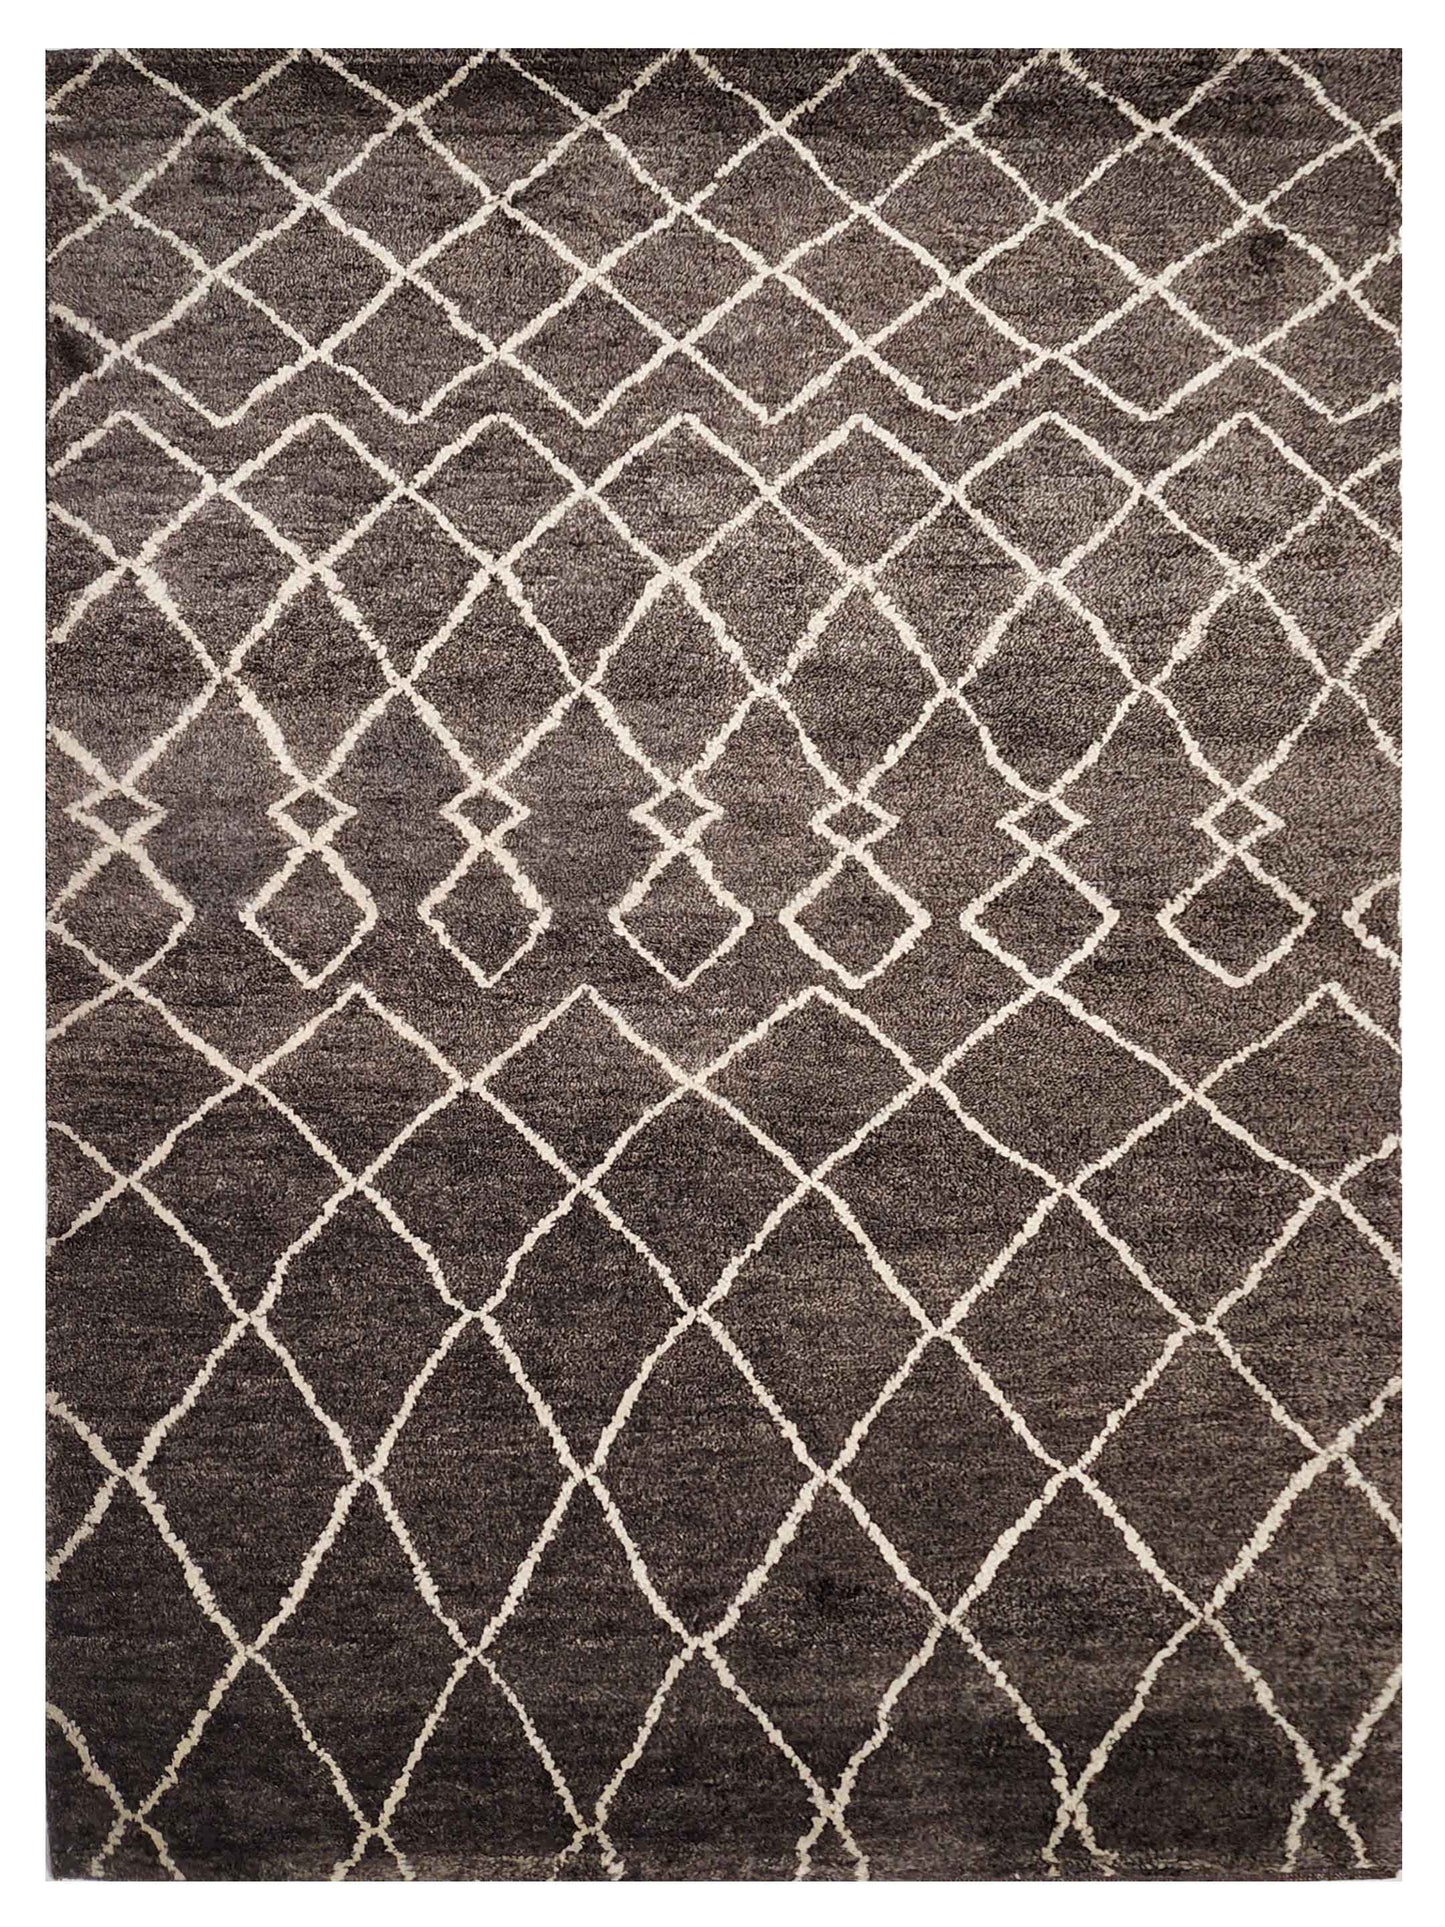 Artisan Marion MO-235 Brown Transitional Knotted Rug